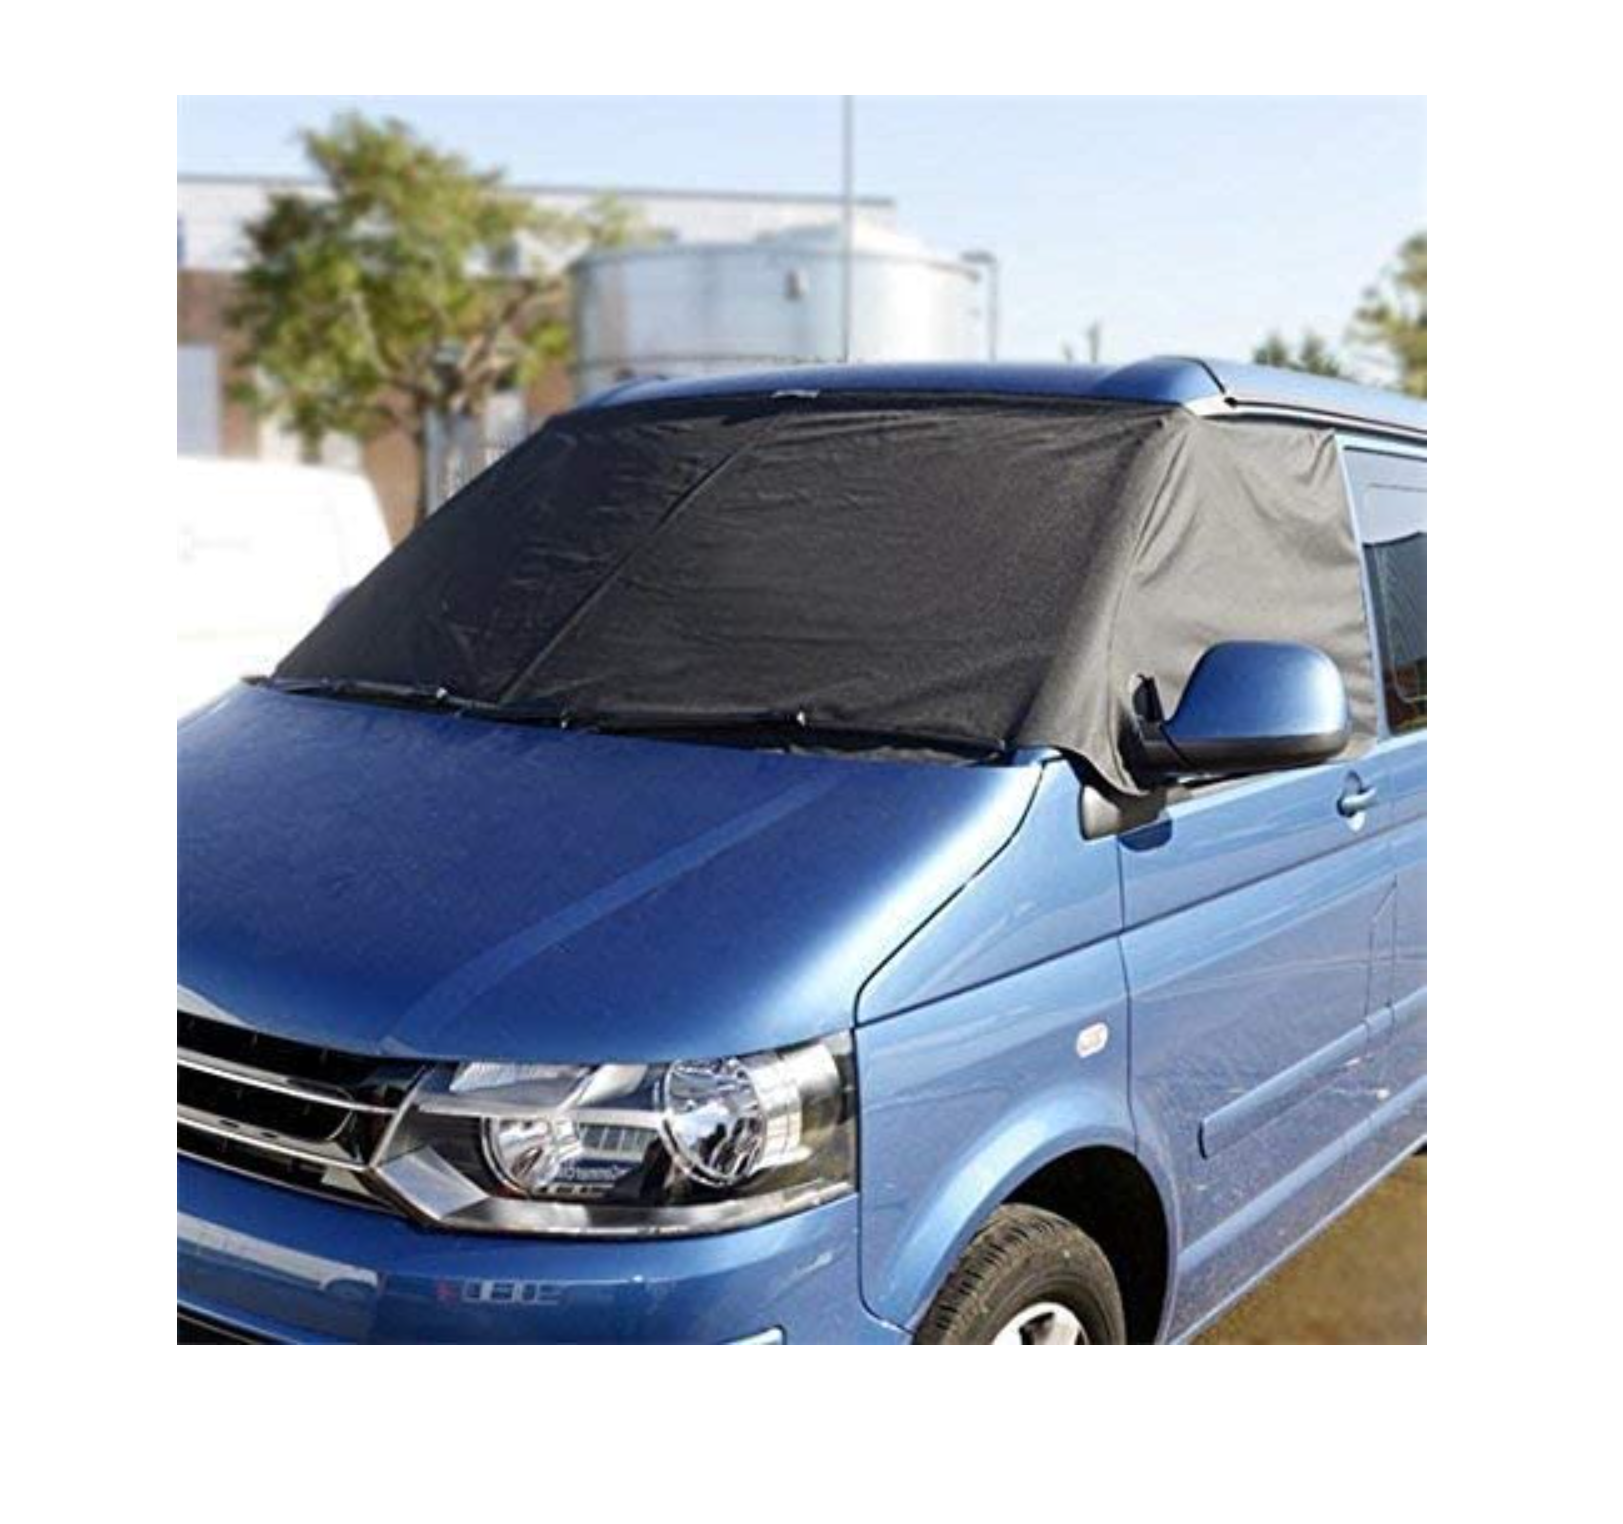 FITS VW TRANSPORTER T5 Custom Covers  Luxury Front Windscreen Wrap Cover - BLACK